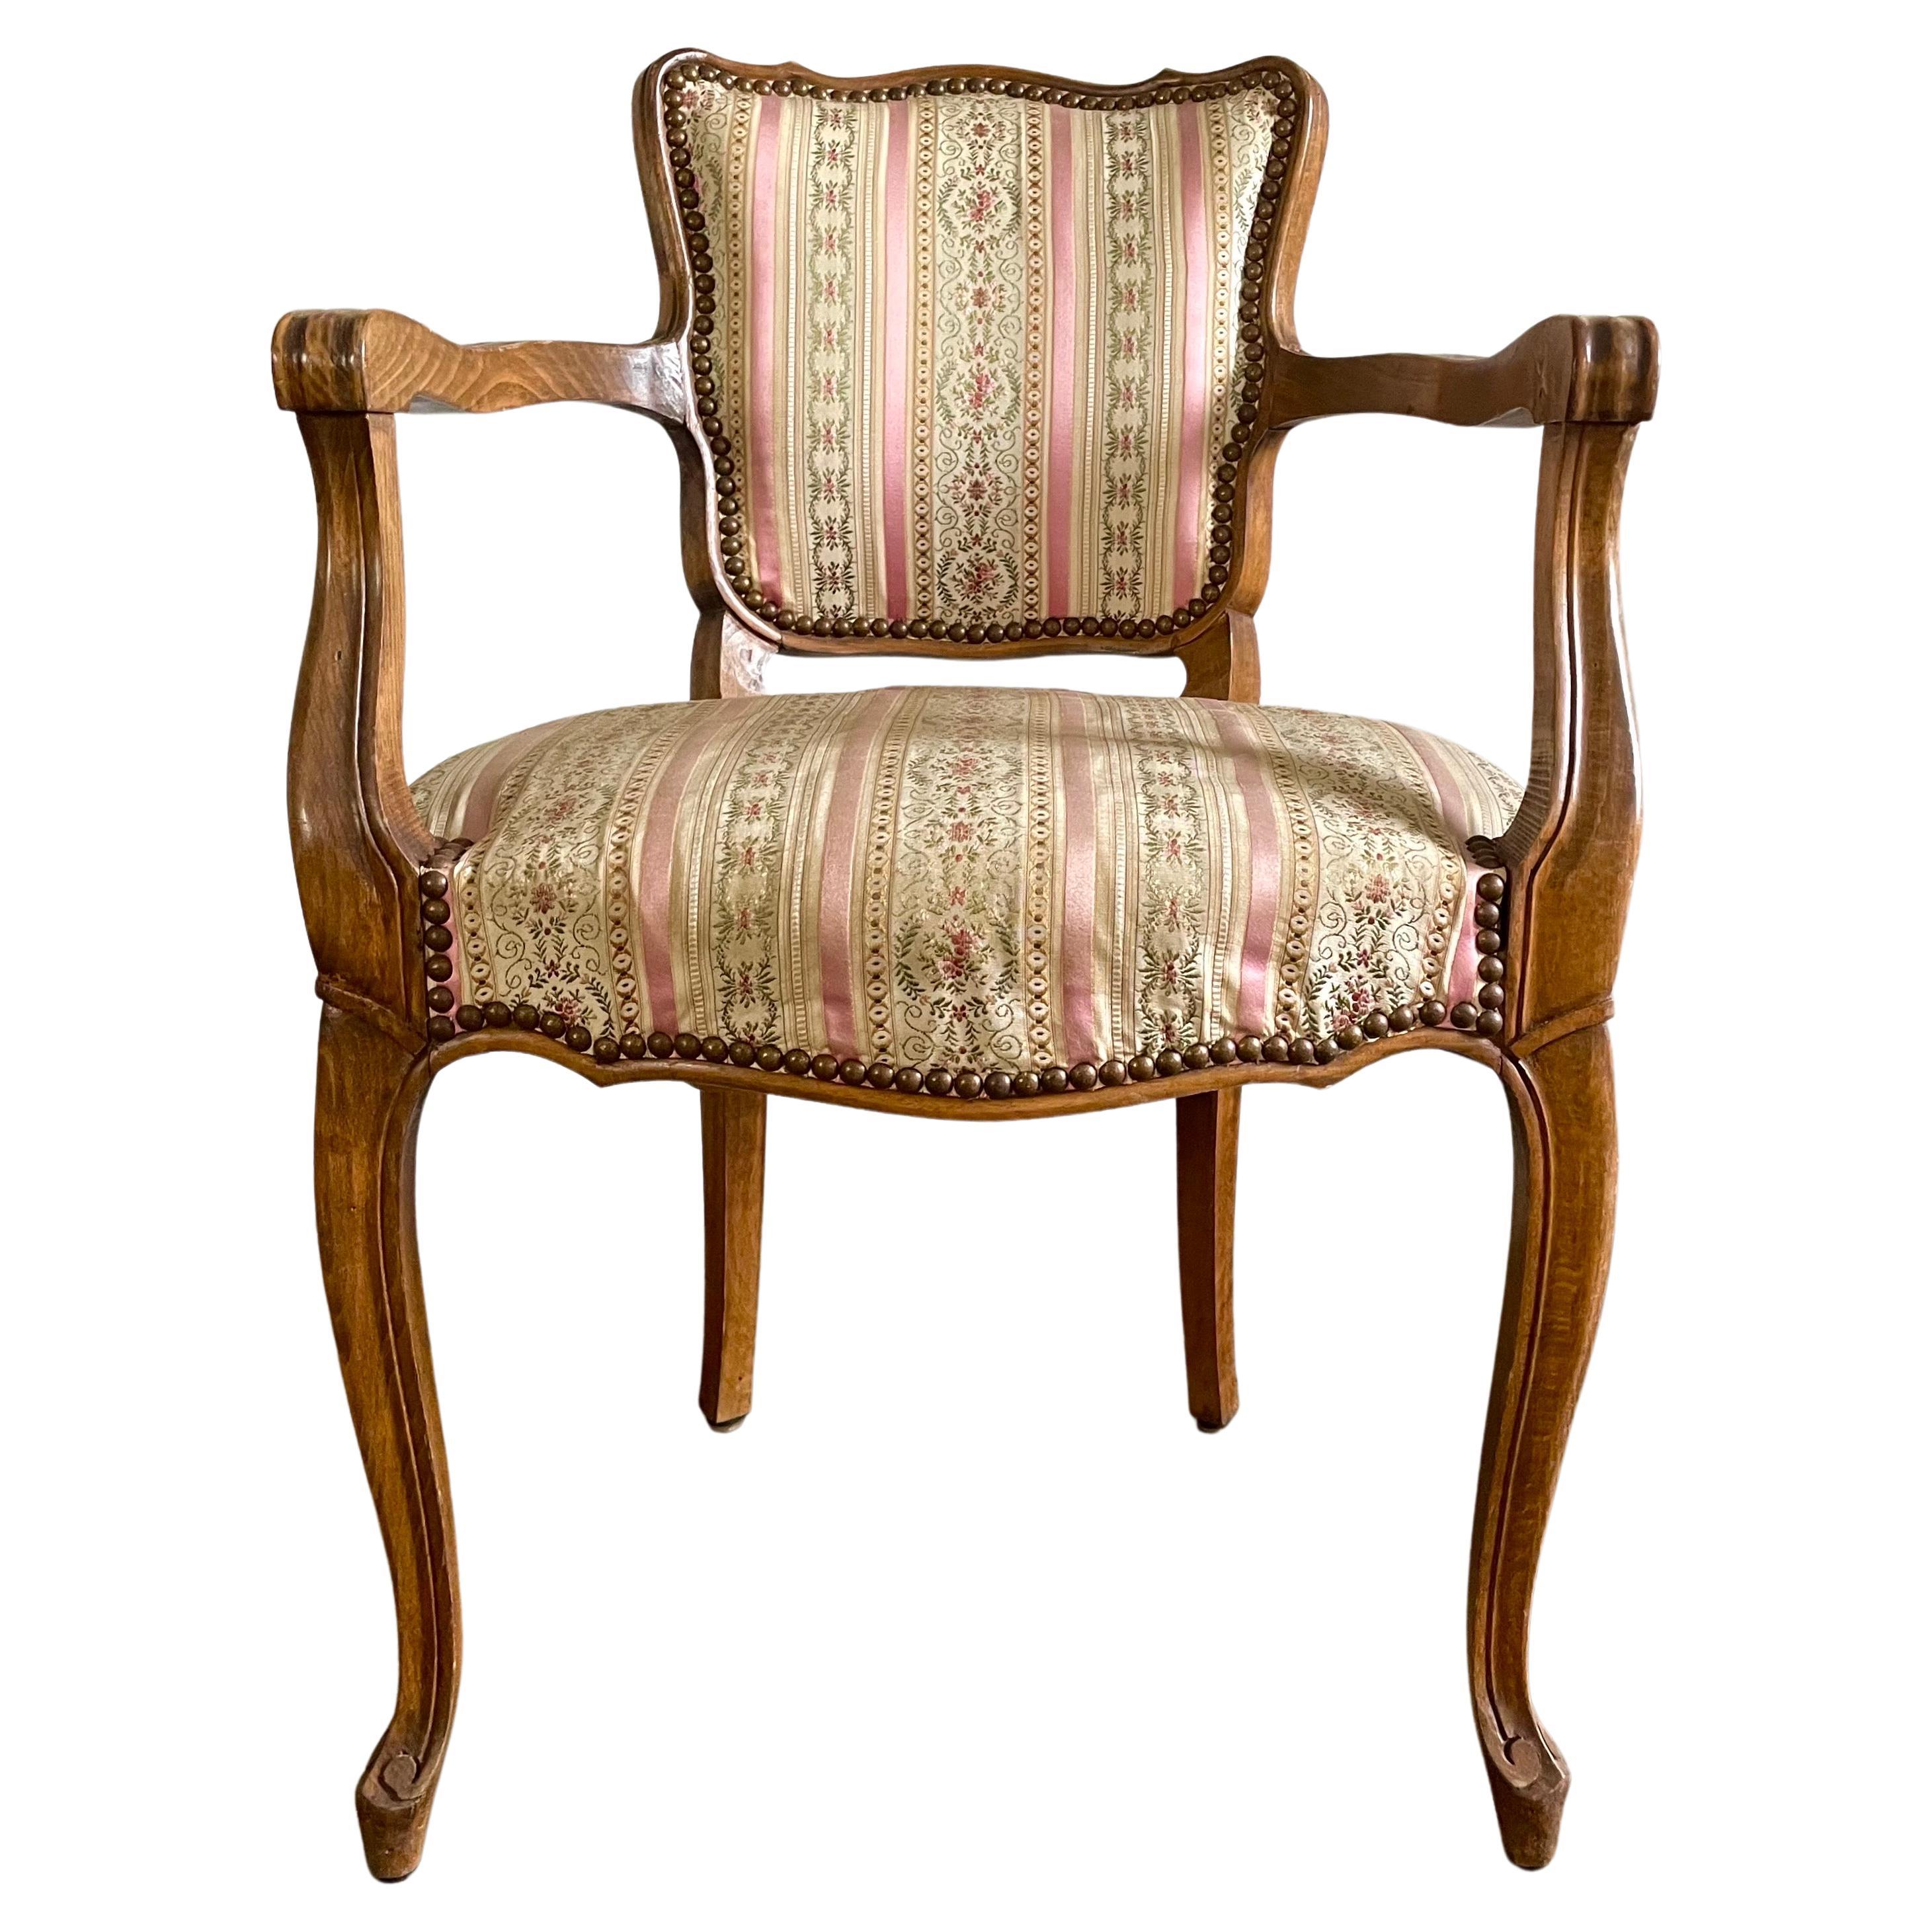 Pair of Louis XV style Bridge armchairs - Office armchairs;
Pretty silky tapestry in shades of beige, pink and green, characteristic of the Louis XV style.

Classic low-back model with armrests. At desk height.
The Louis XV desk chair, also